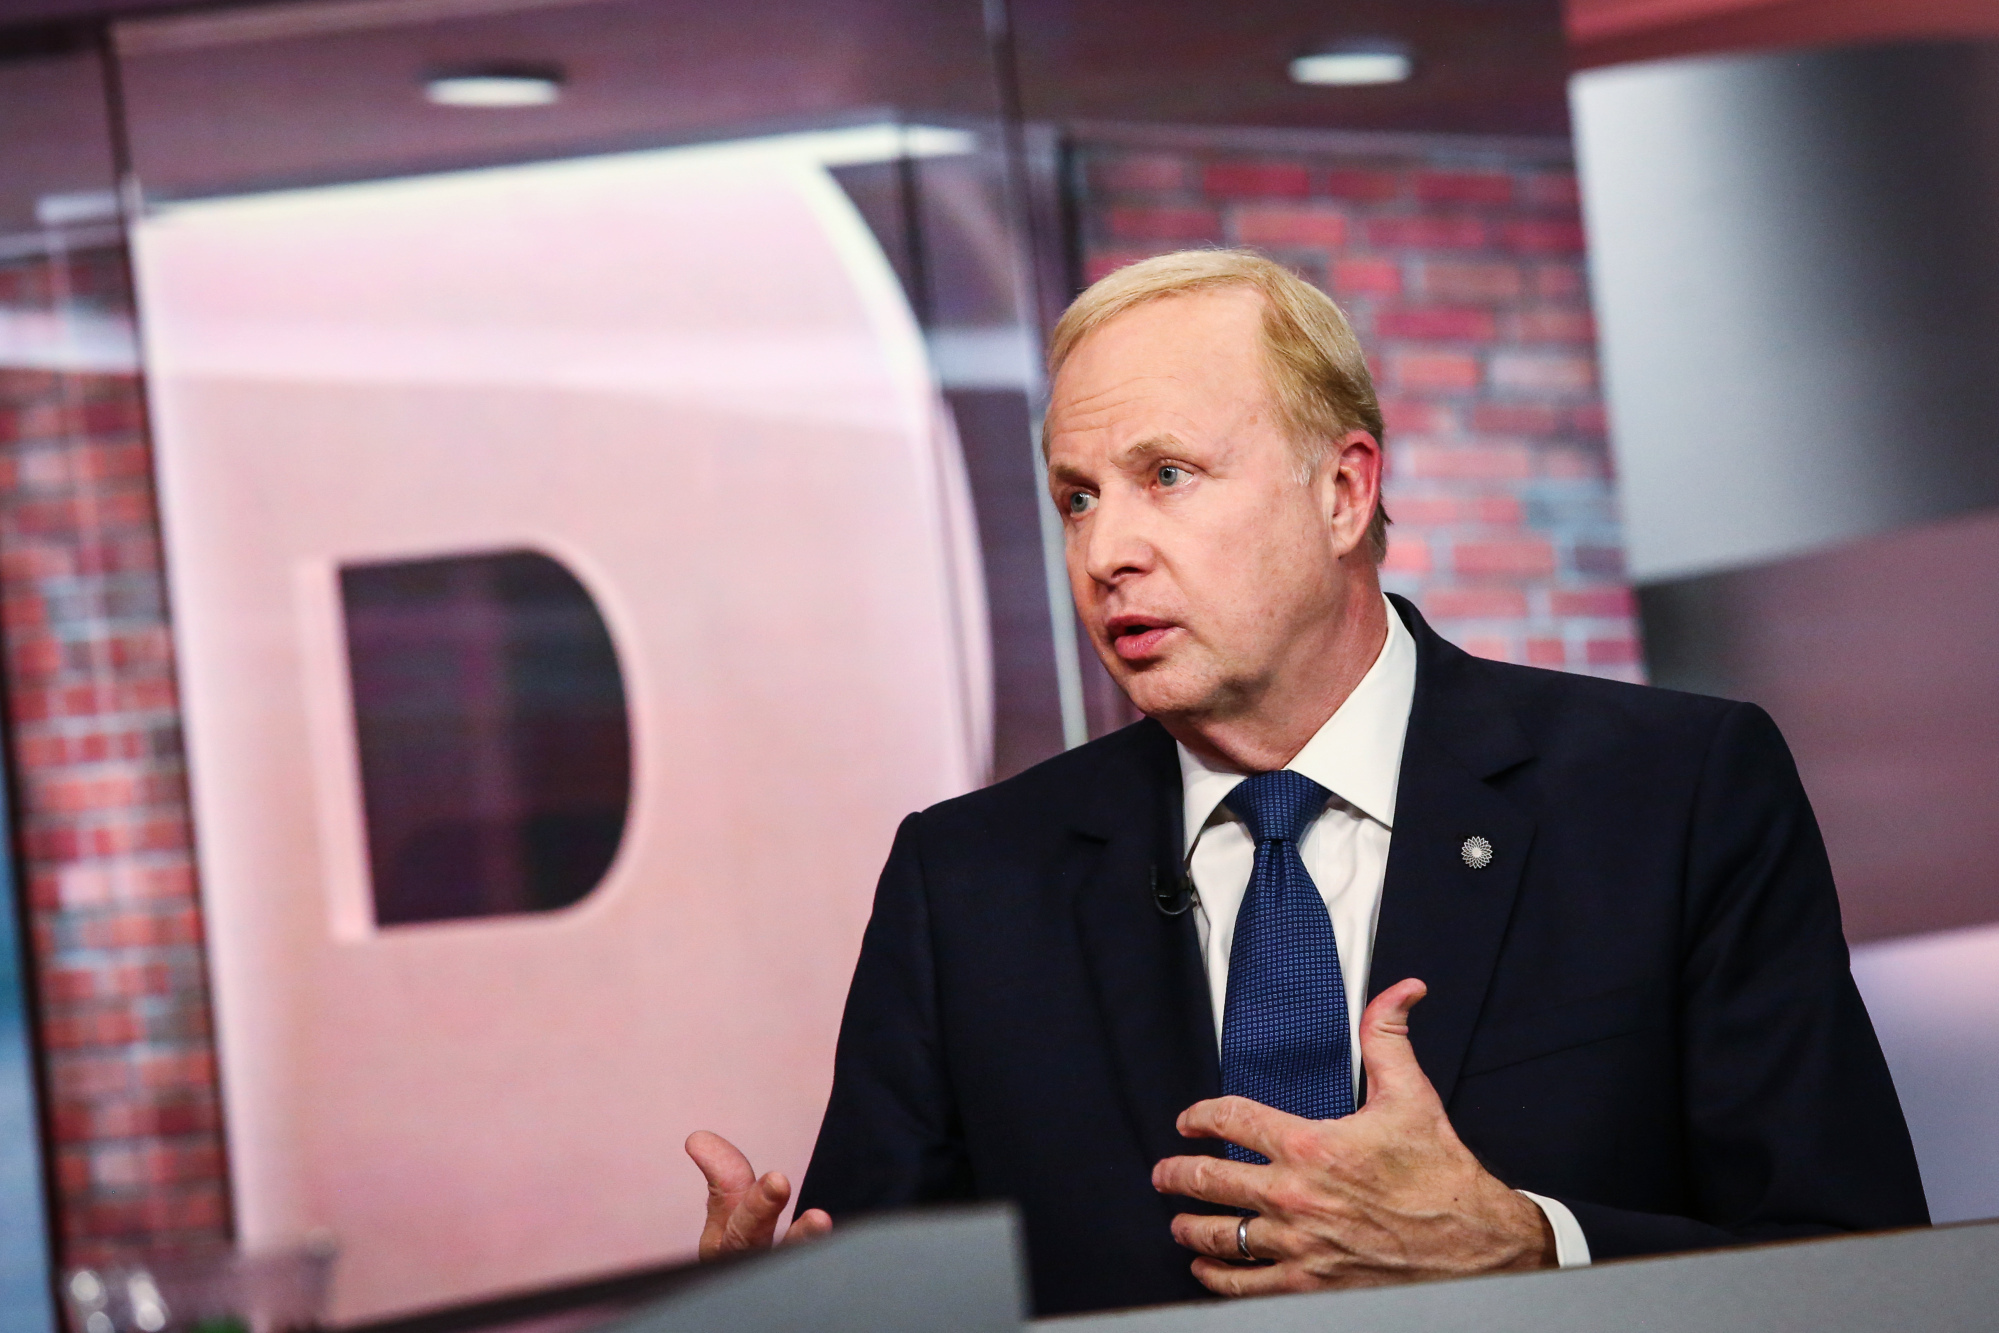 Bob Dudley, chief executive officer of BP Plc, speaks during a Bloomberg Television interview in New York, U.S., on Tuesday, Sept. 25, 2018.  Photographer: Christopher Goodney/Bloomberg